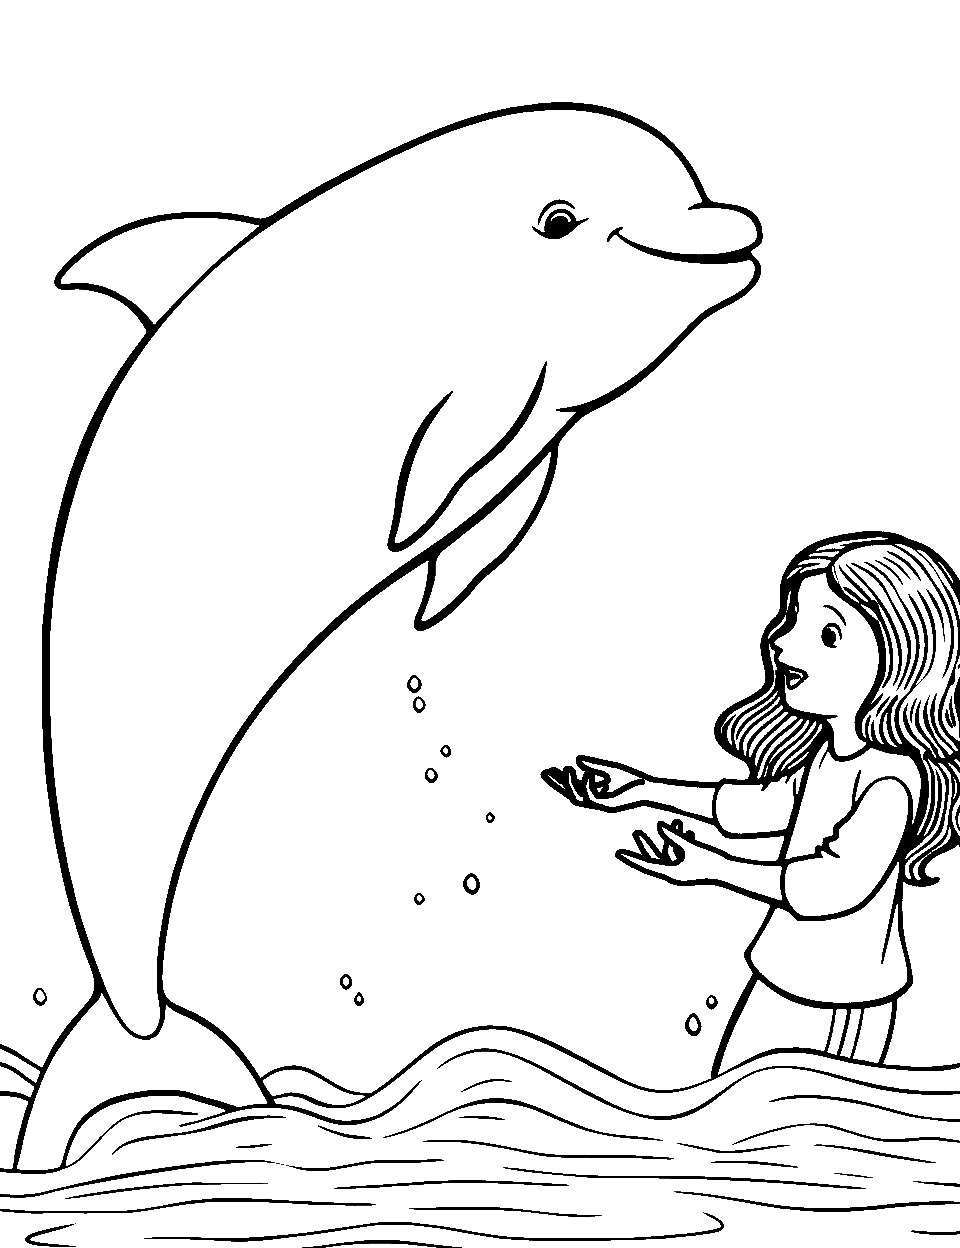 Girl and Dolphin Bond Coloring Page - A little girl gently welcoming and warming up to friendship with a dolphin.